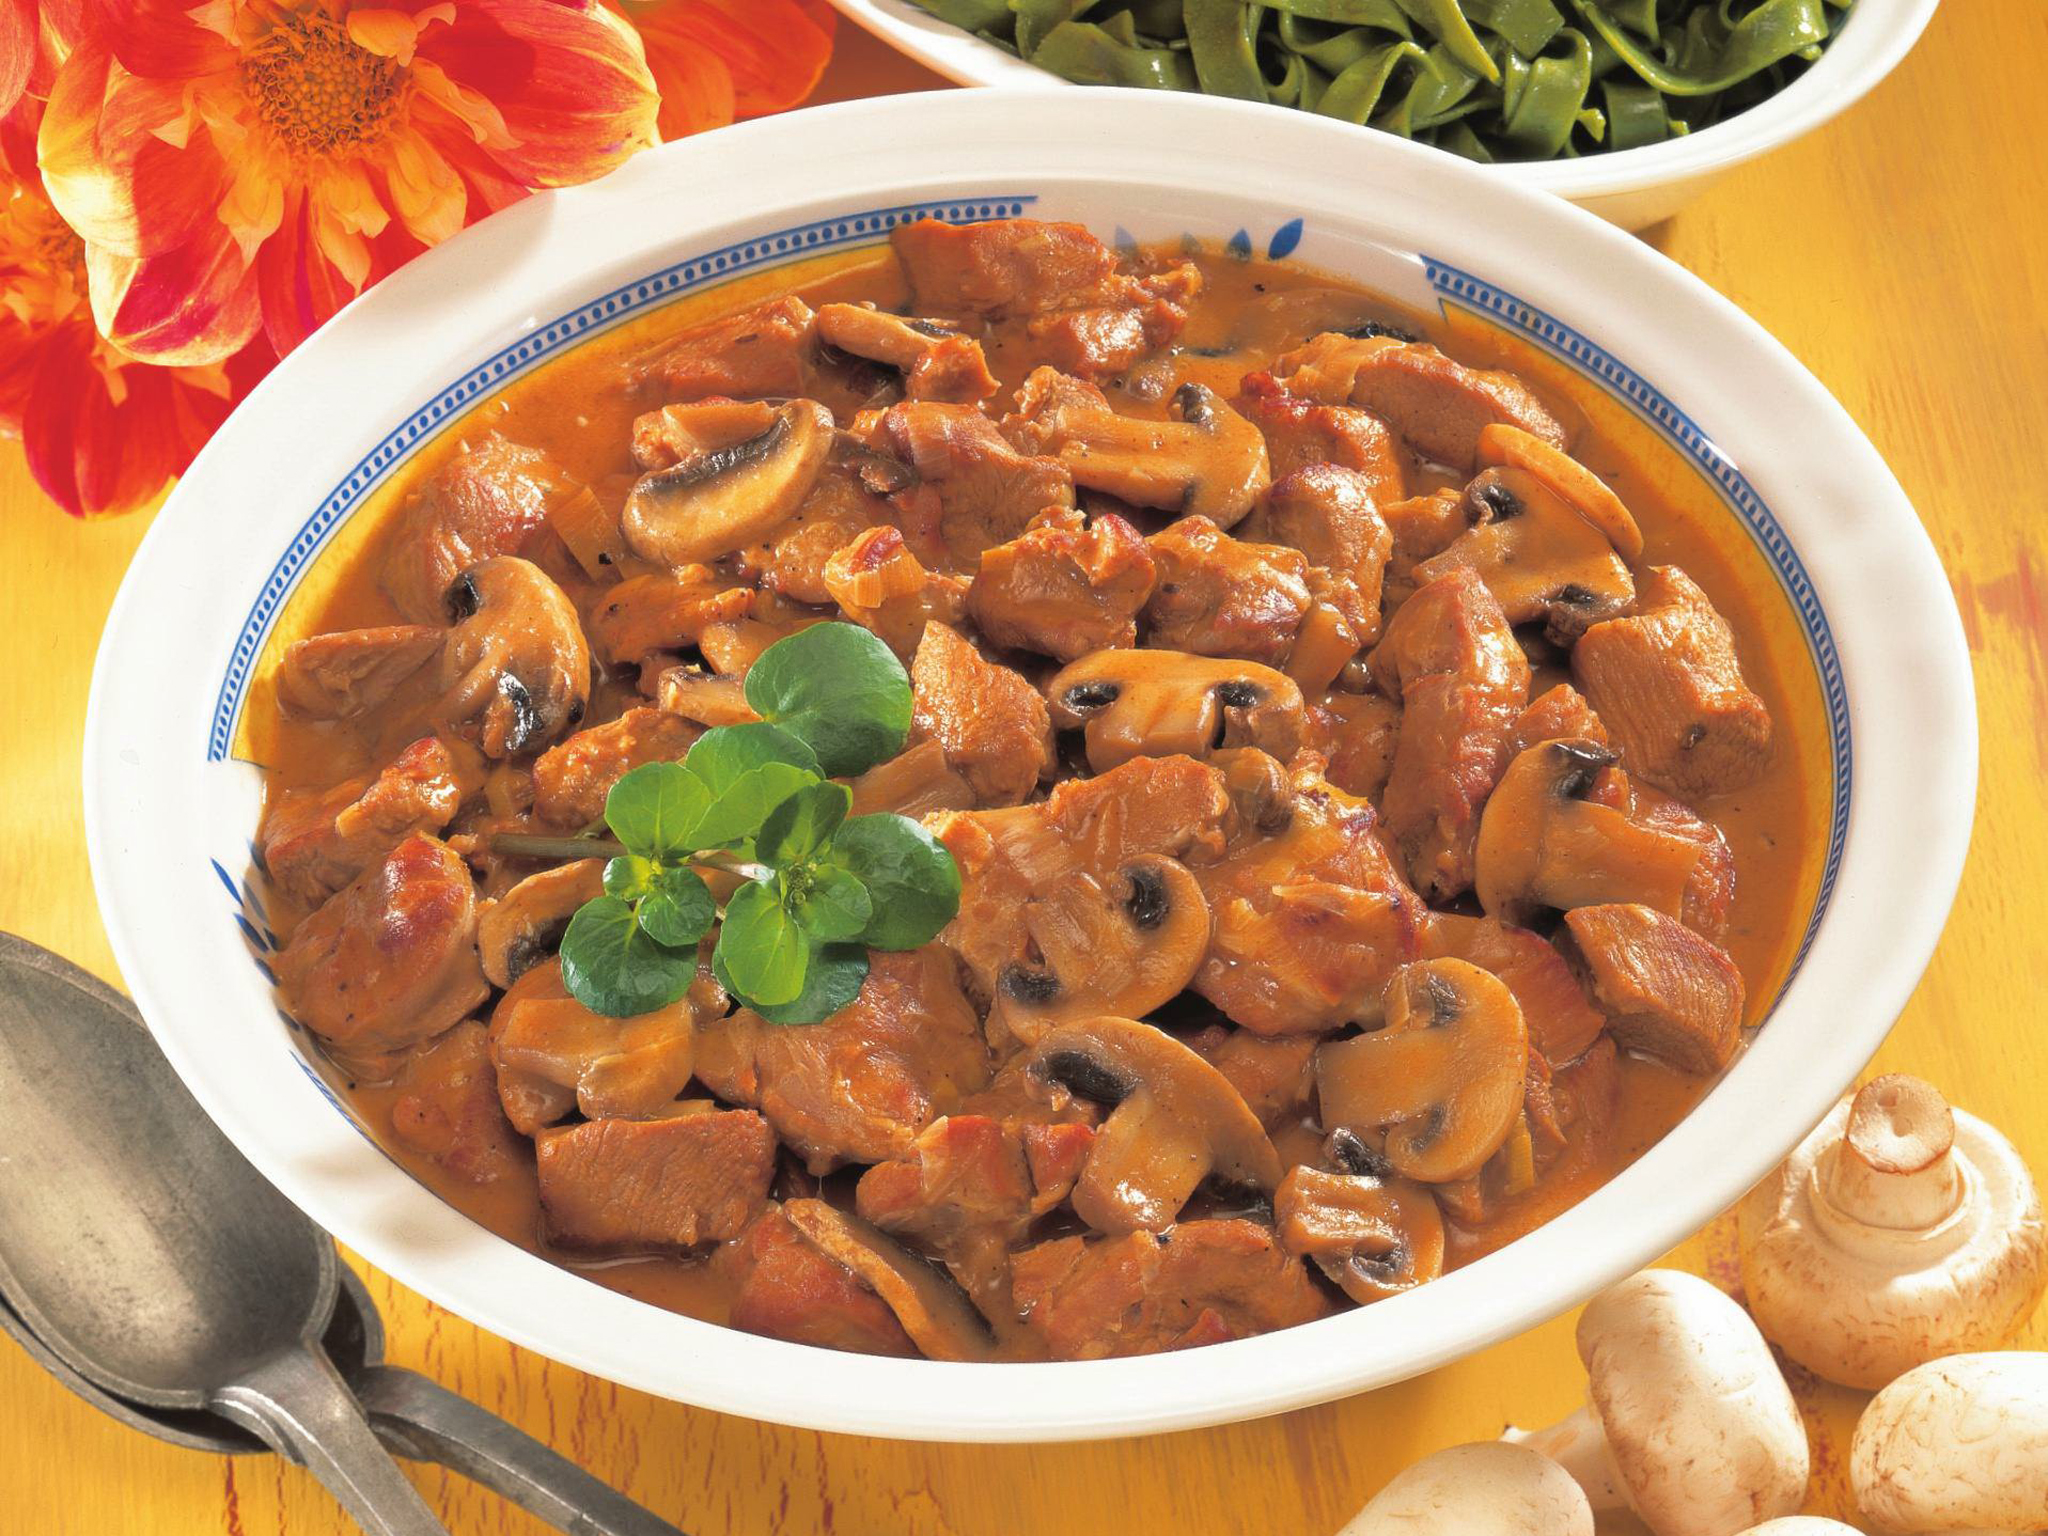 ragout of veal and mushrooms